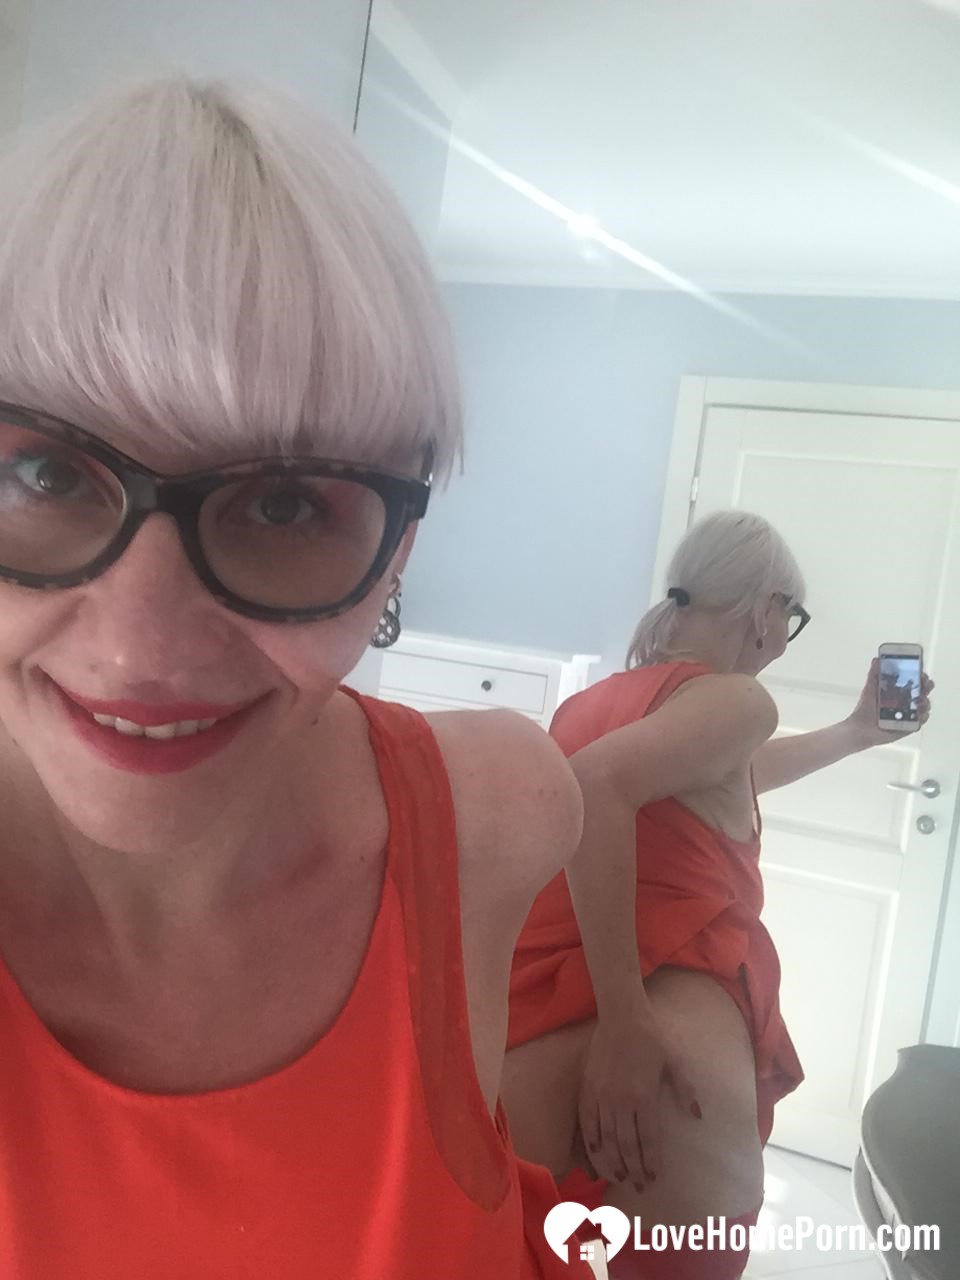 Blonde MILF with glasses teasing with nudes